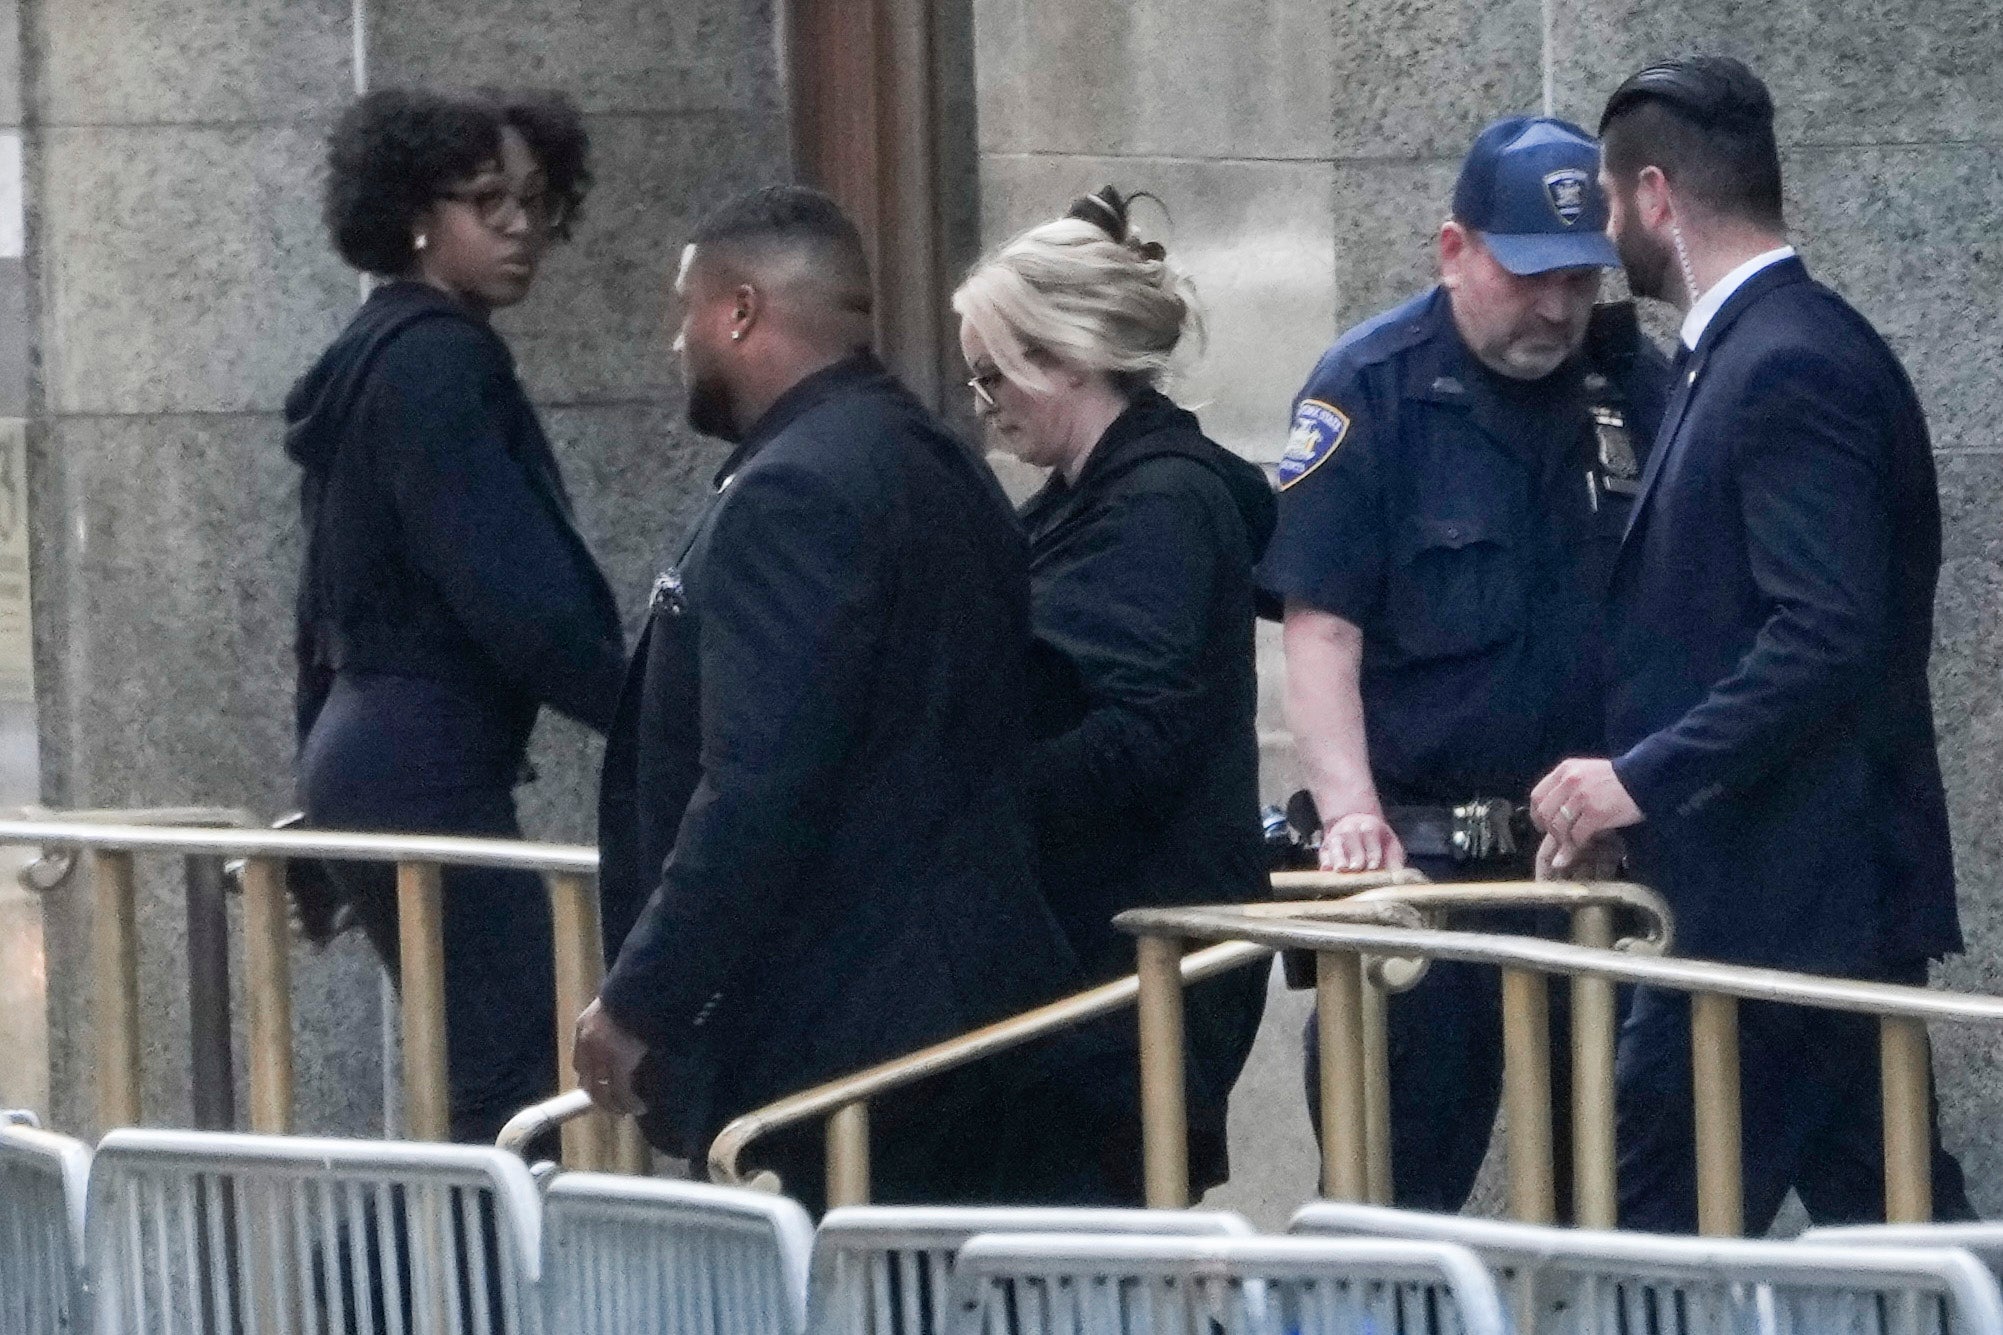 Stormy Daniels exits the courthouse at Manhattan criminal court in New York onTuesday